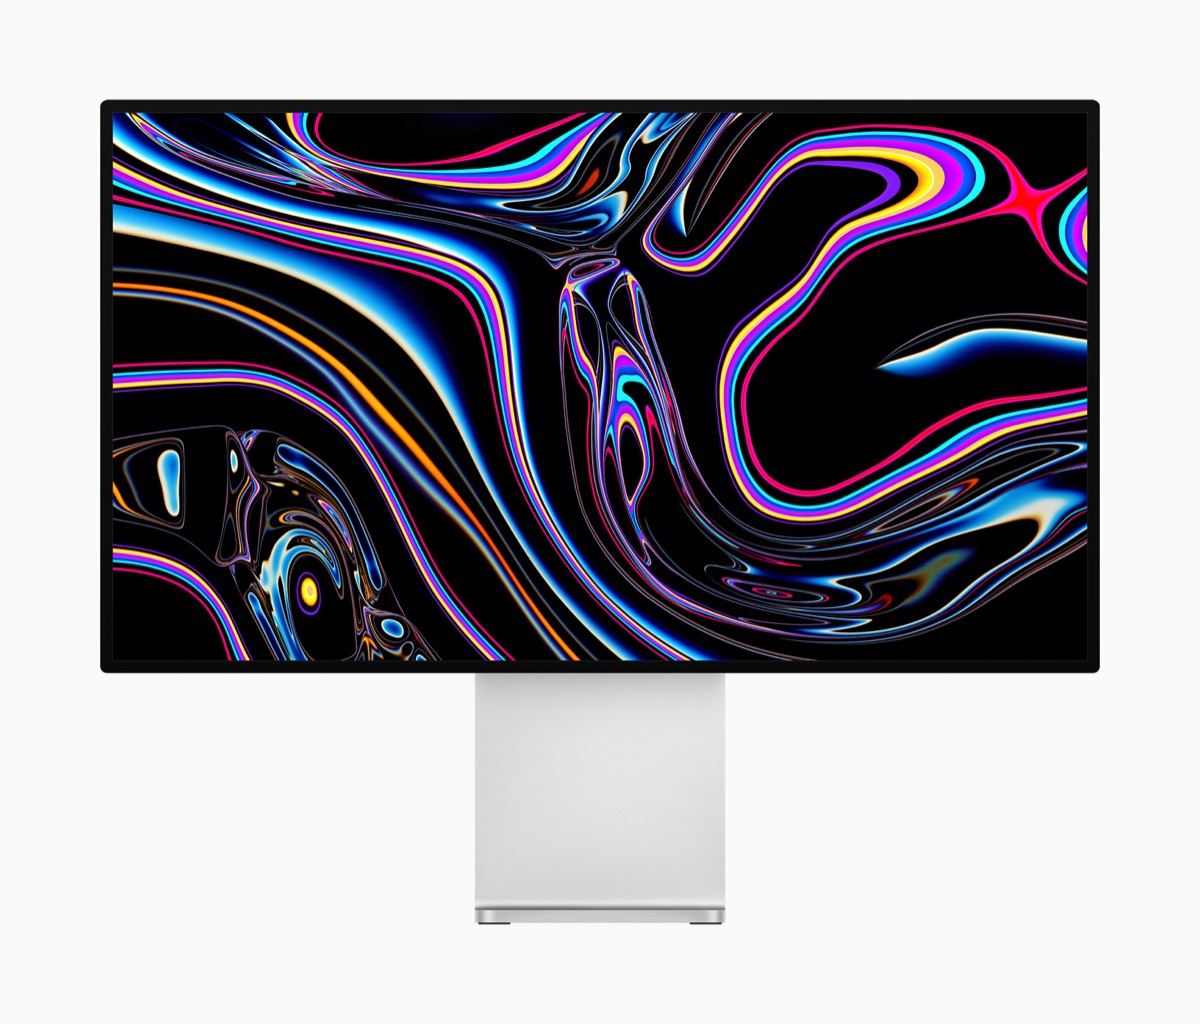 Apple Unveils 32inch 6K 'Pro Display XDR' Monitor Starting at 4,999